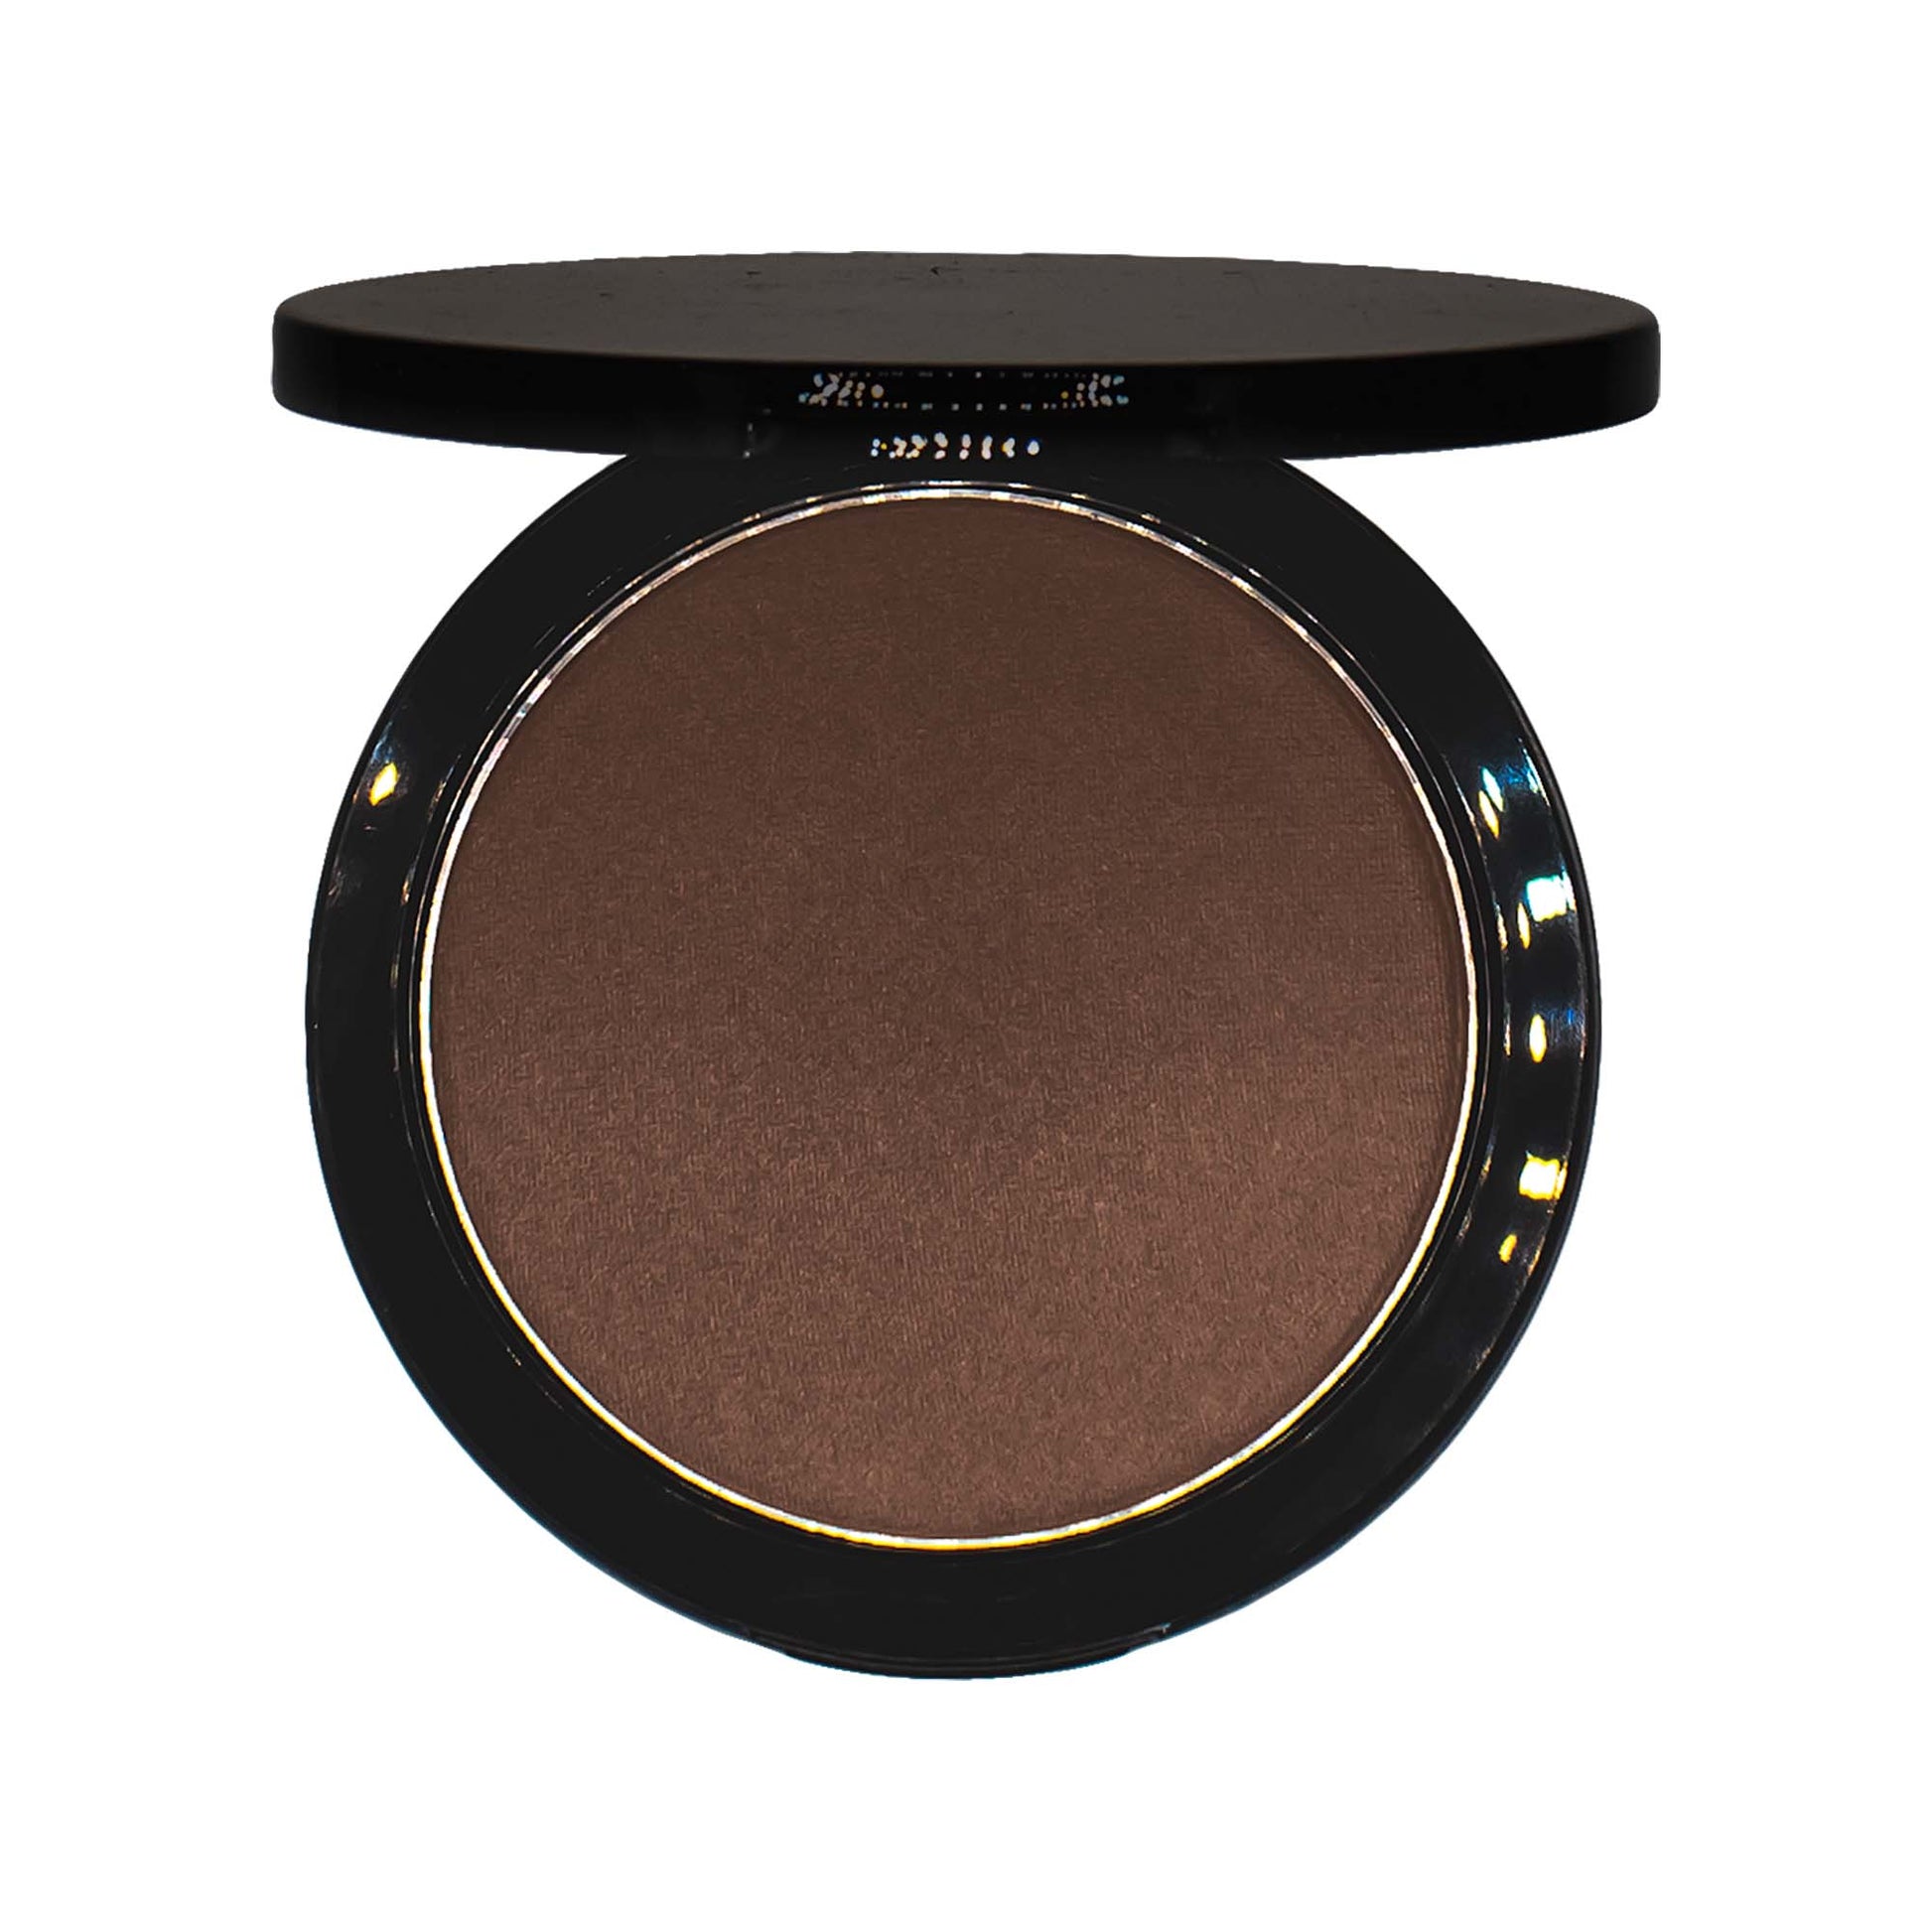 Get a natural, sculpted look all year round with our Cruisin Organics Caramel Bronzer. Infused with the perfect blend of red and brown tones, this silky smooth bronzer enhances your makeup look. Mattifying to reduce shine, it's suitable for all skin tones. Complete your look by pairing it with your favorite blush for a multidimensional finish.